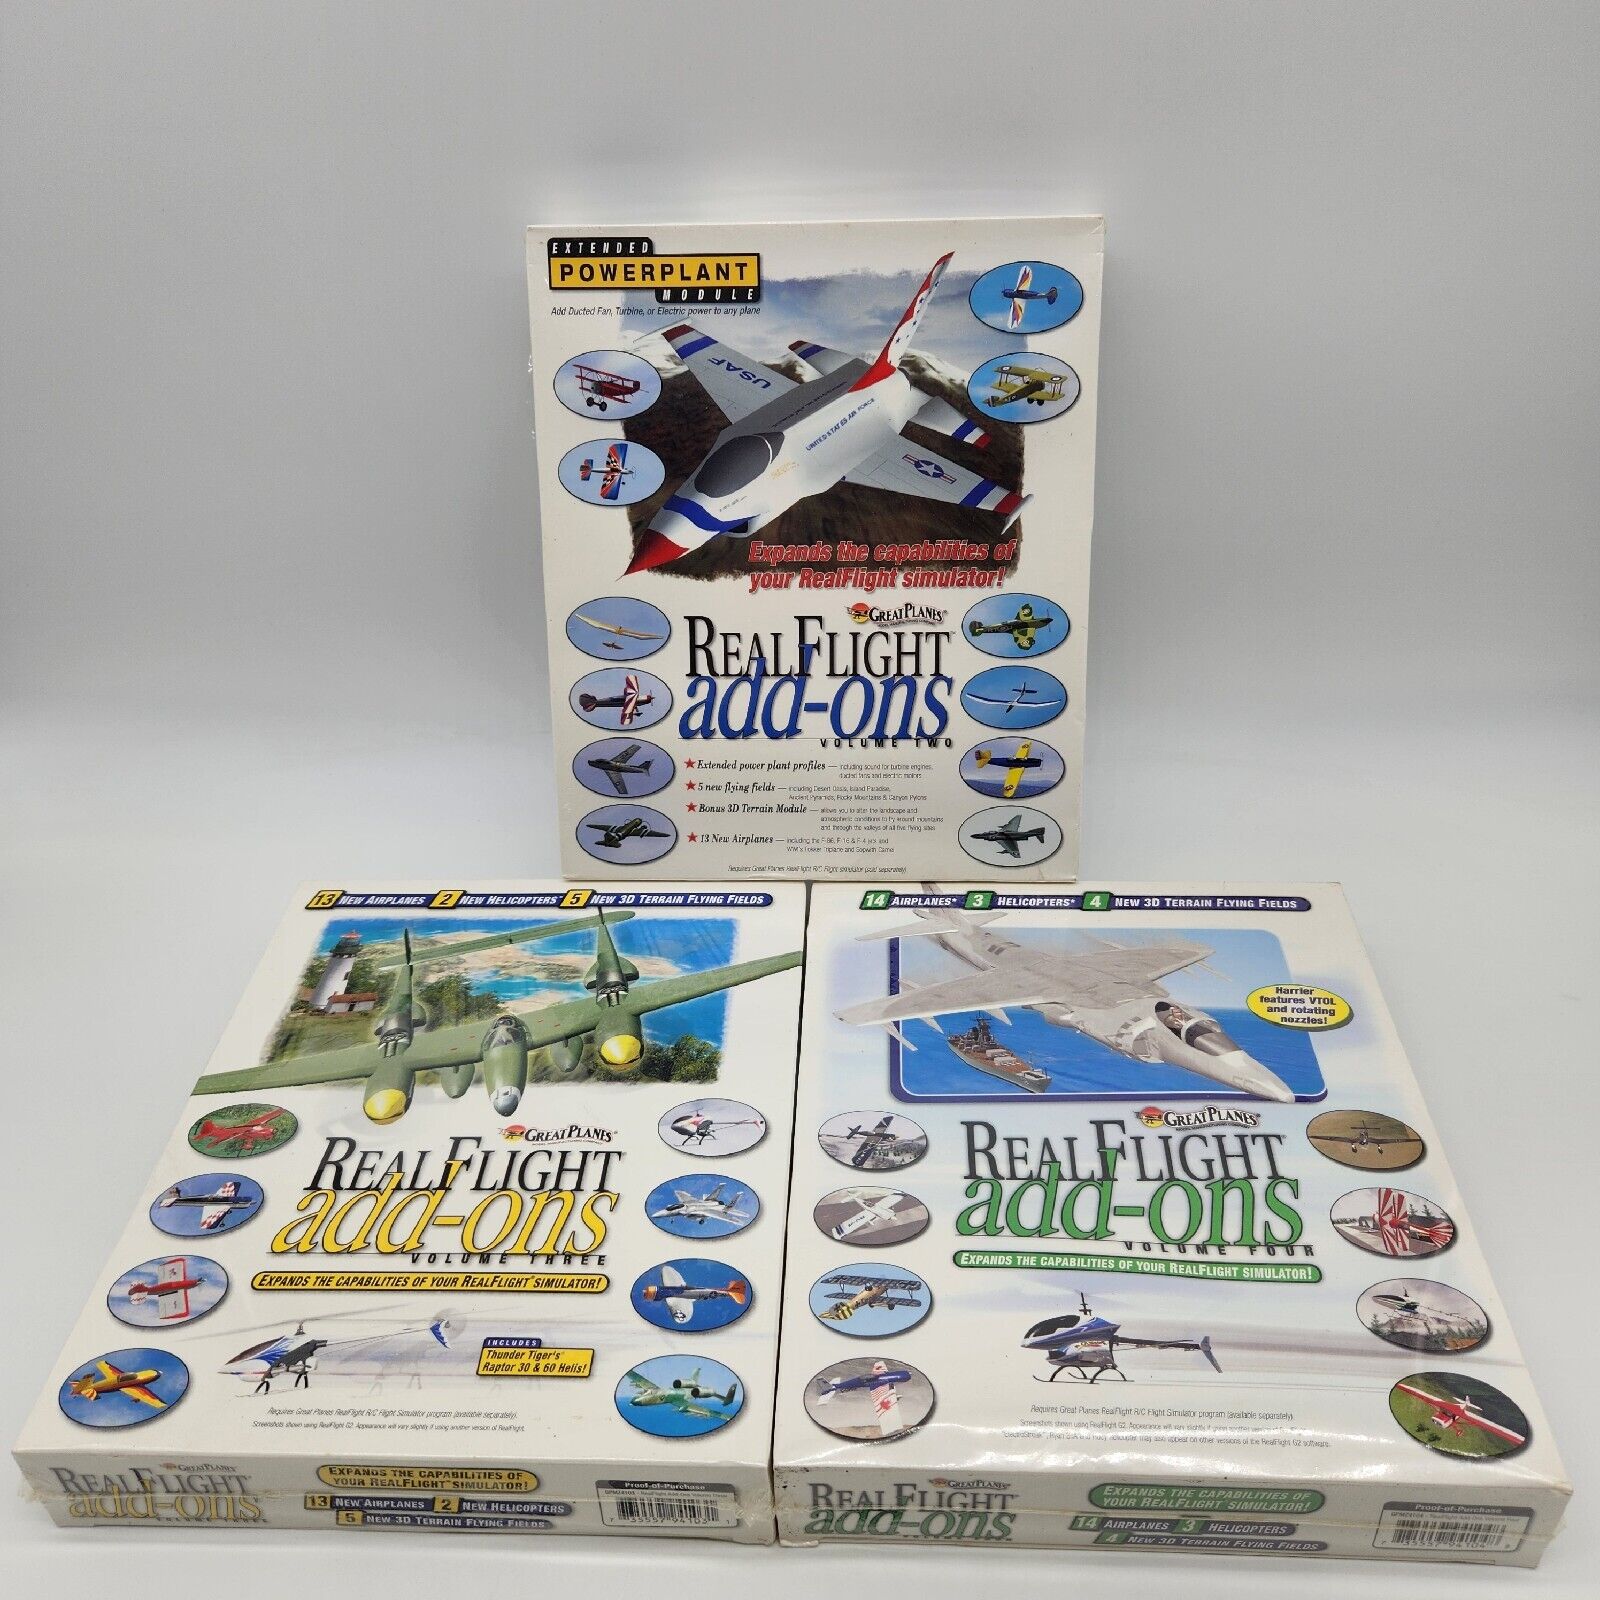 Real Flight add-on Vol 2 3 4 Expands Real Flight G2 Simulator Great Planes New